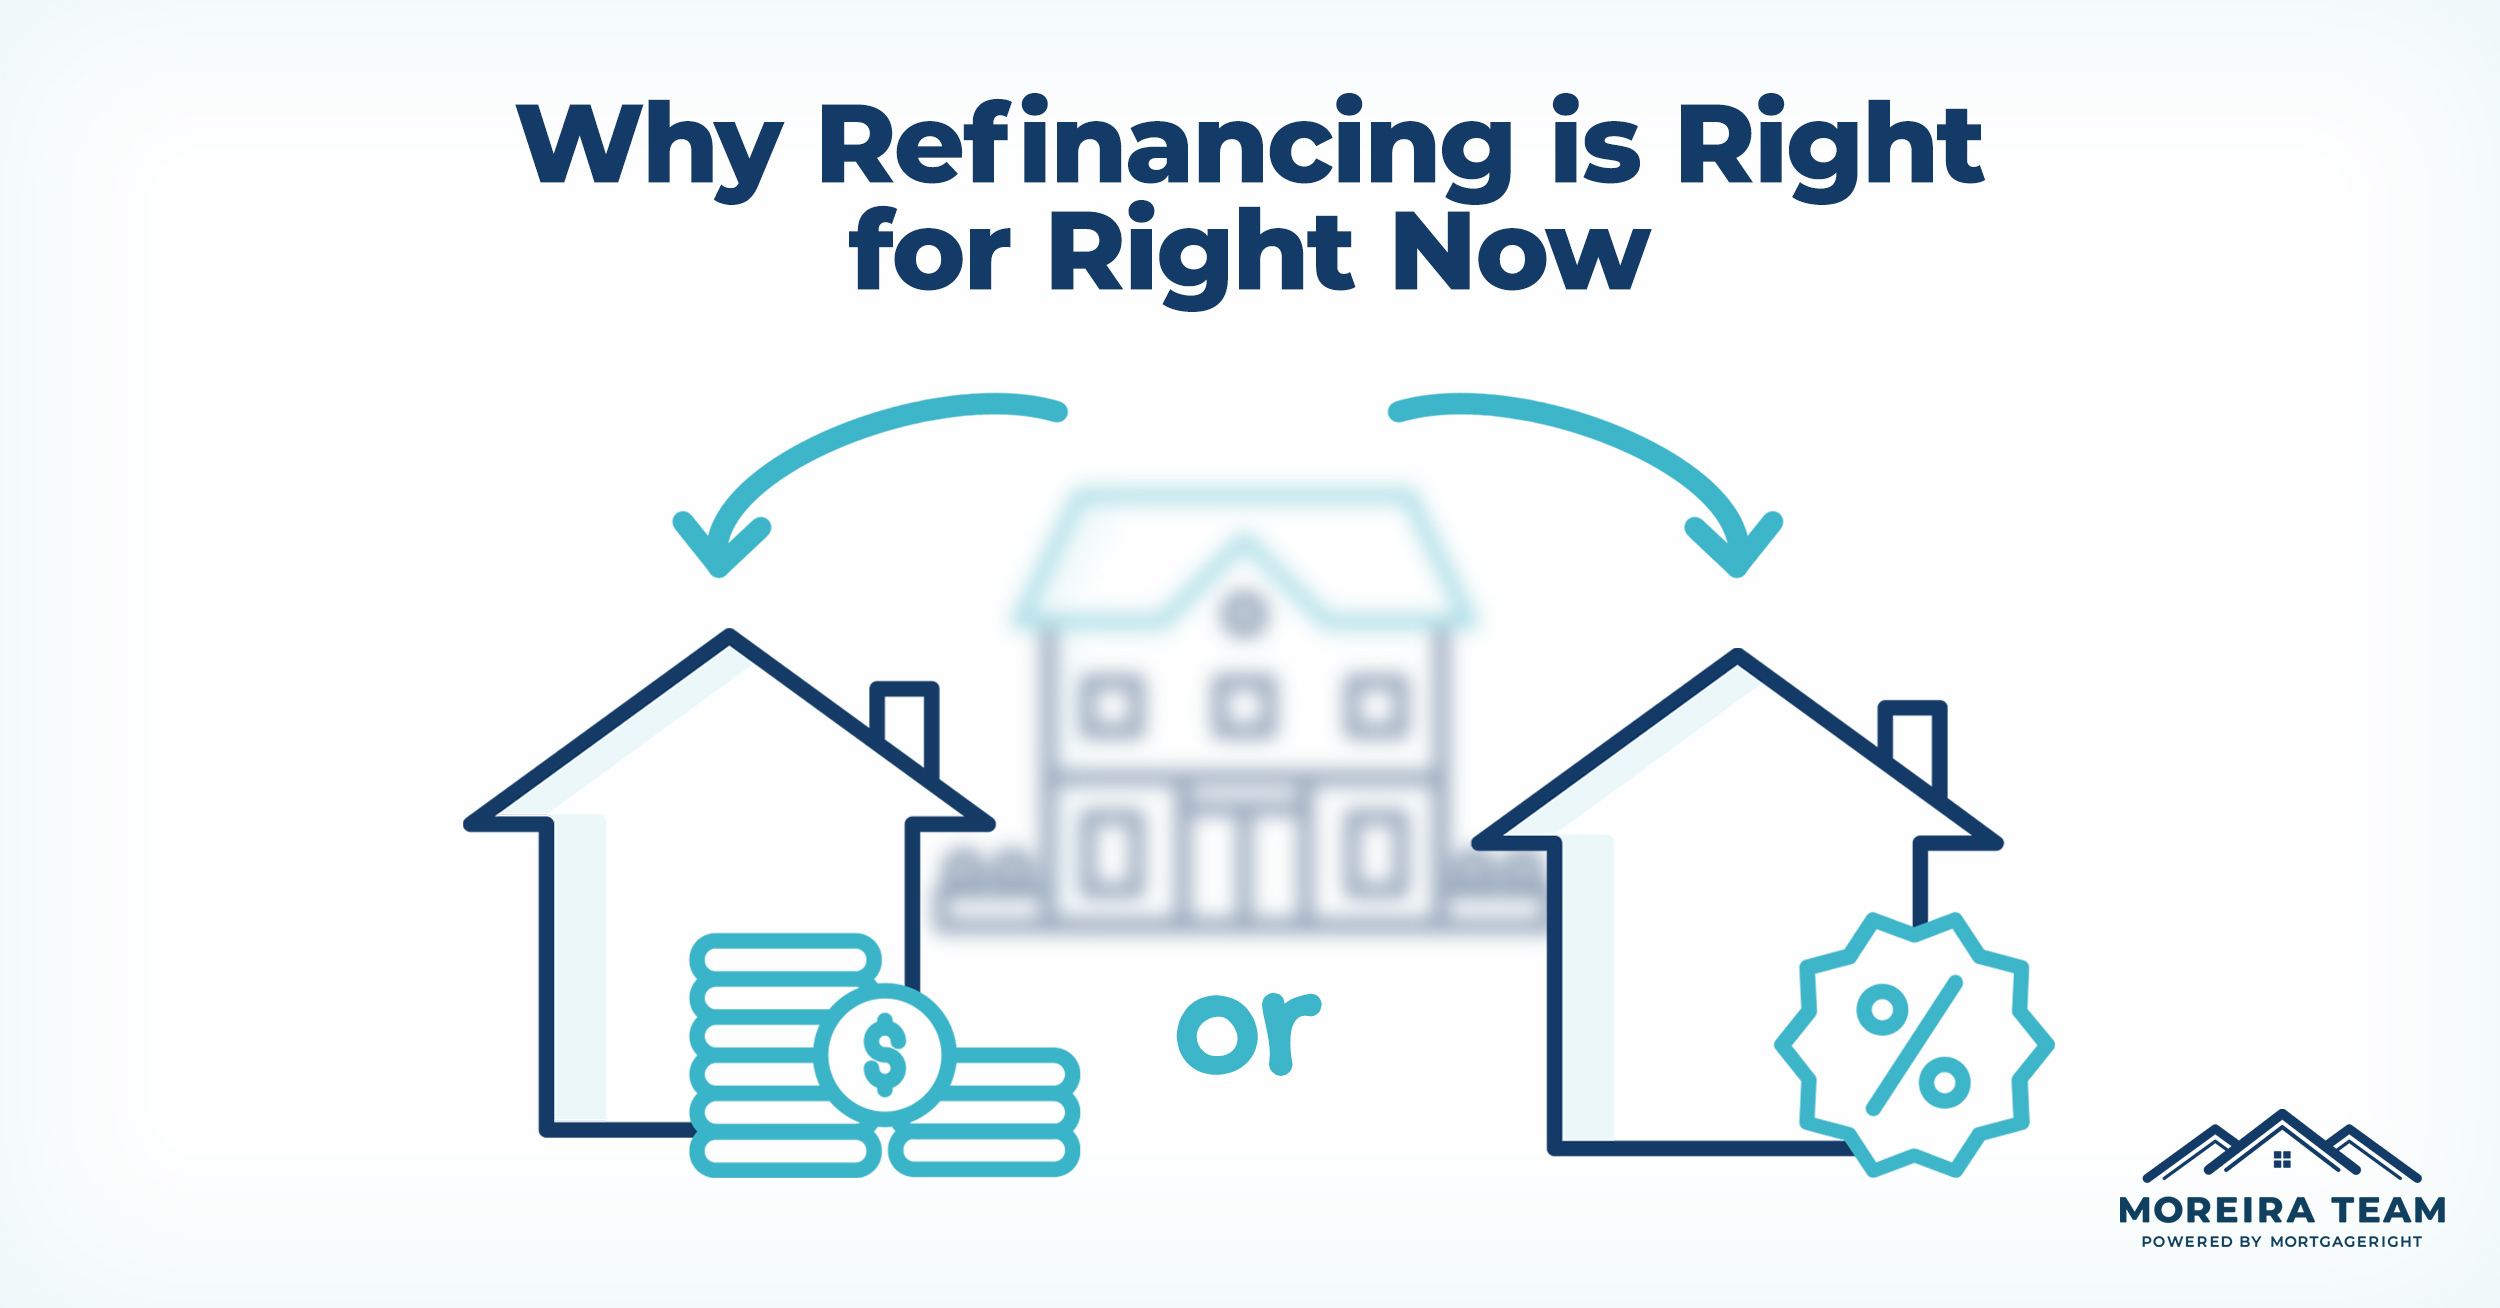 Why Refinancing is Right for Now